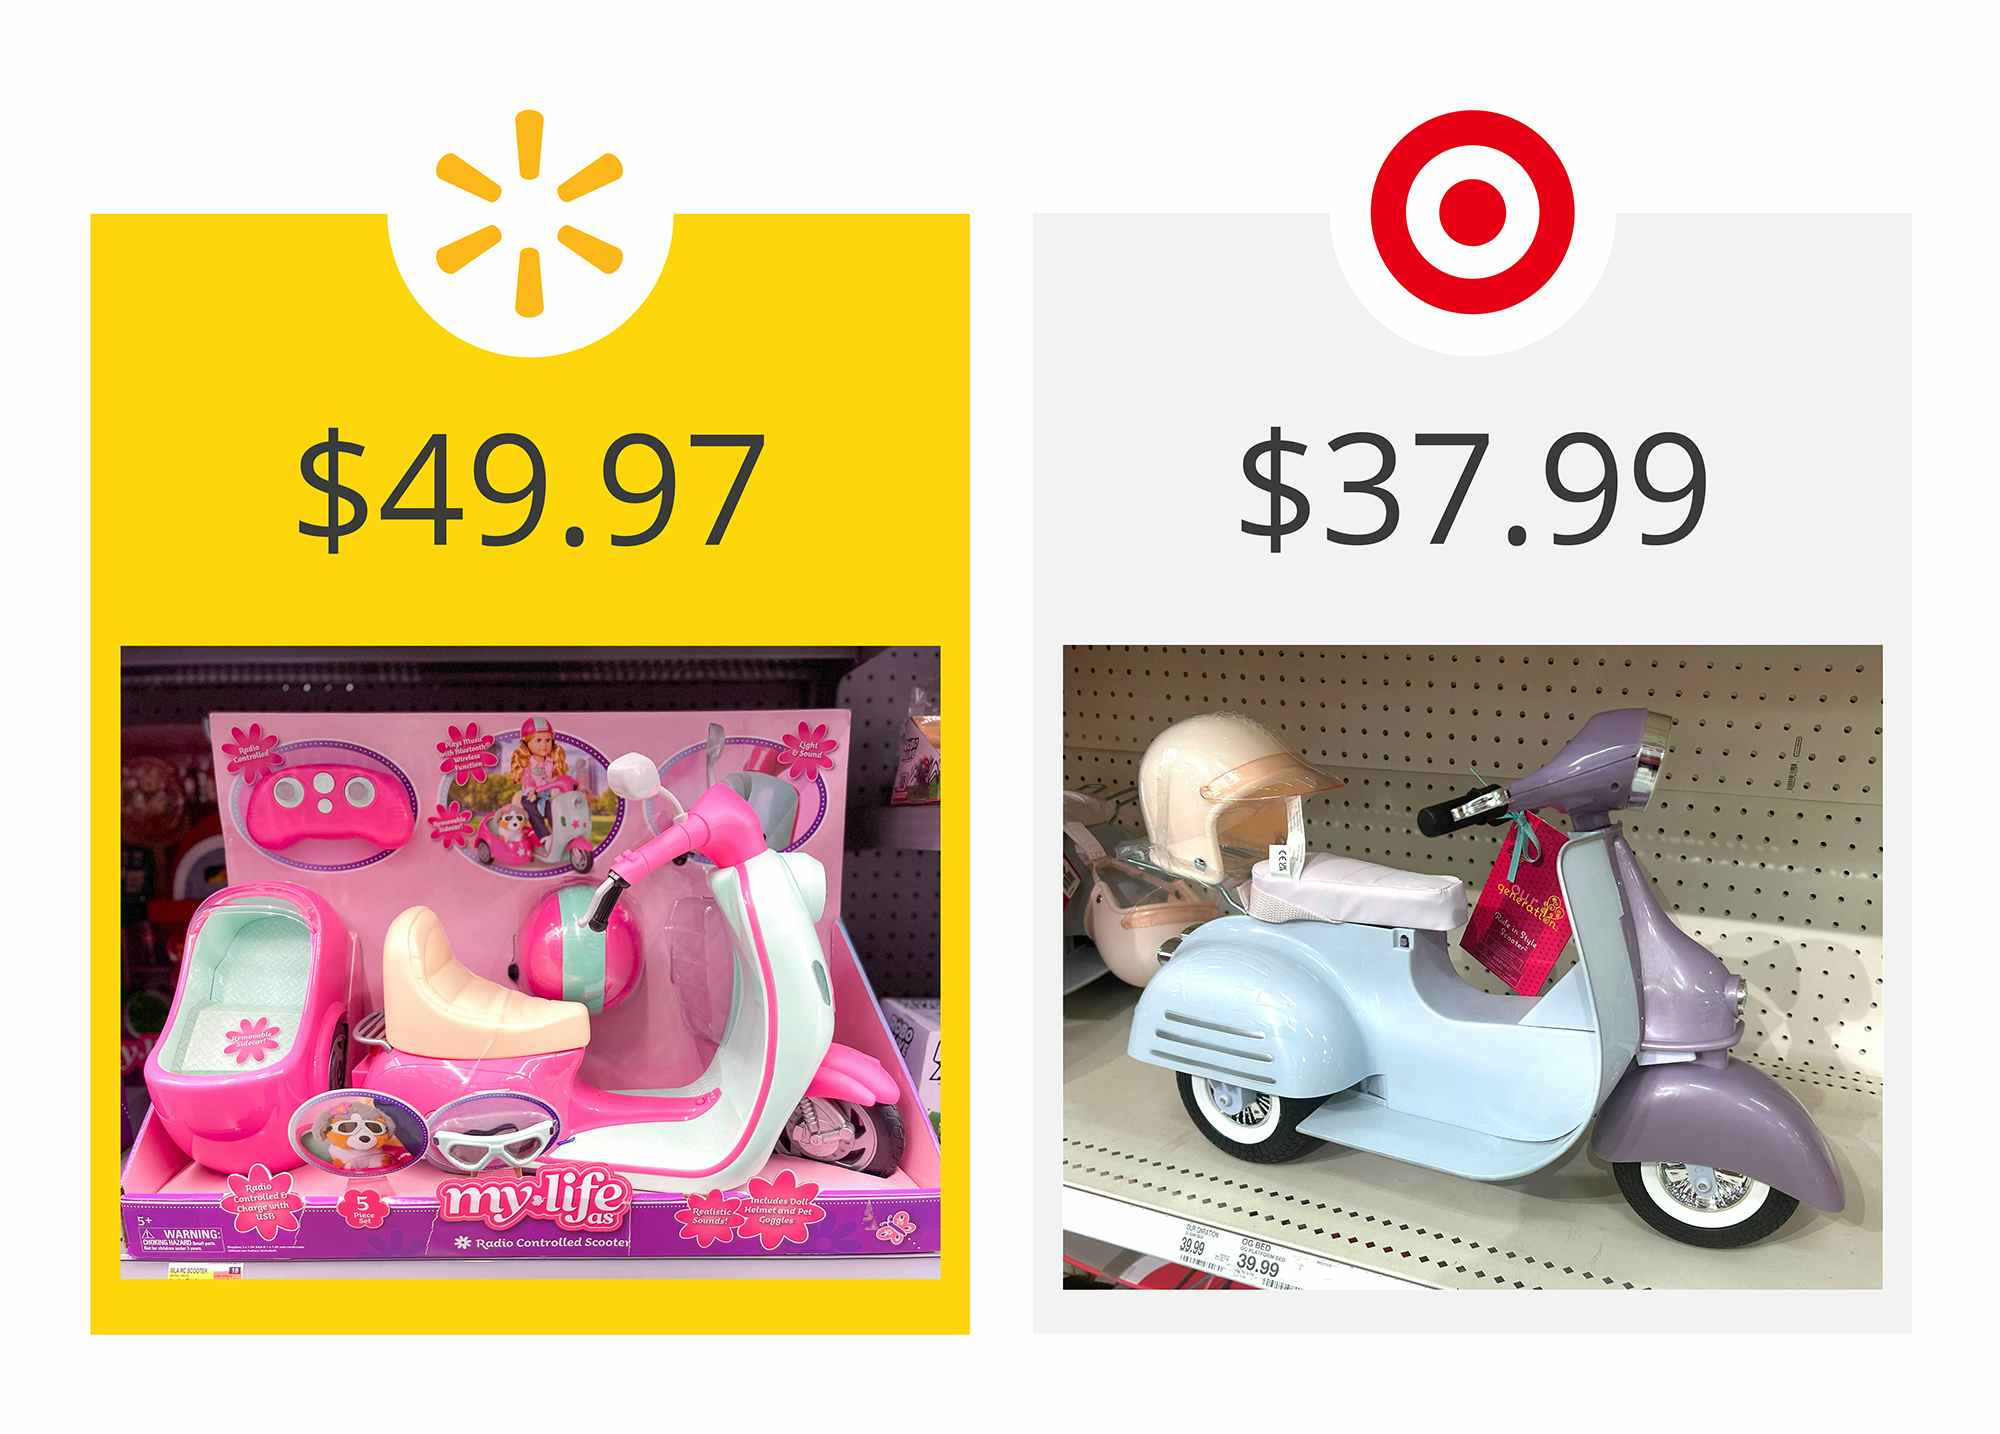 walmart as the winner on a graphic showing price comparison between target's our generation and walmart's my life as doll scooters